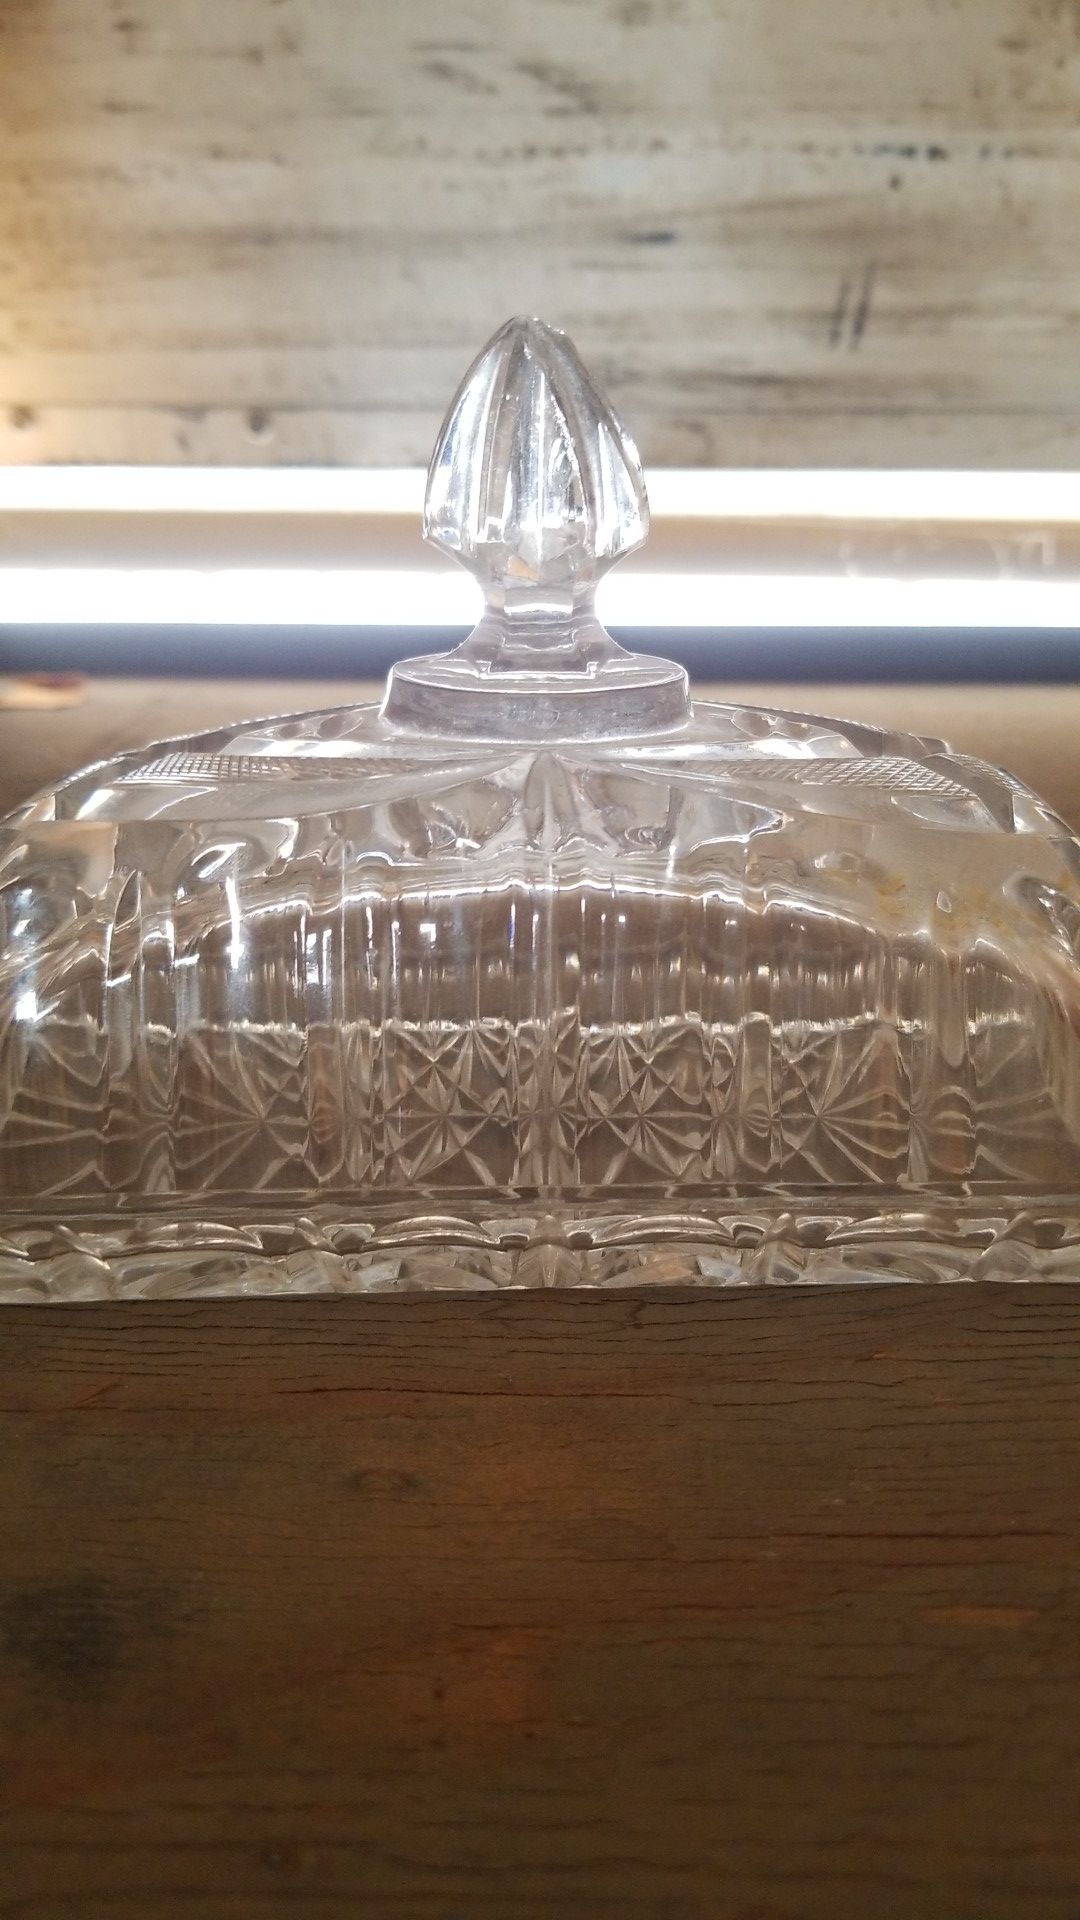 Crystal butter dish with lid